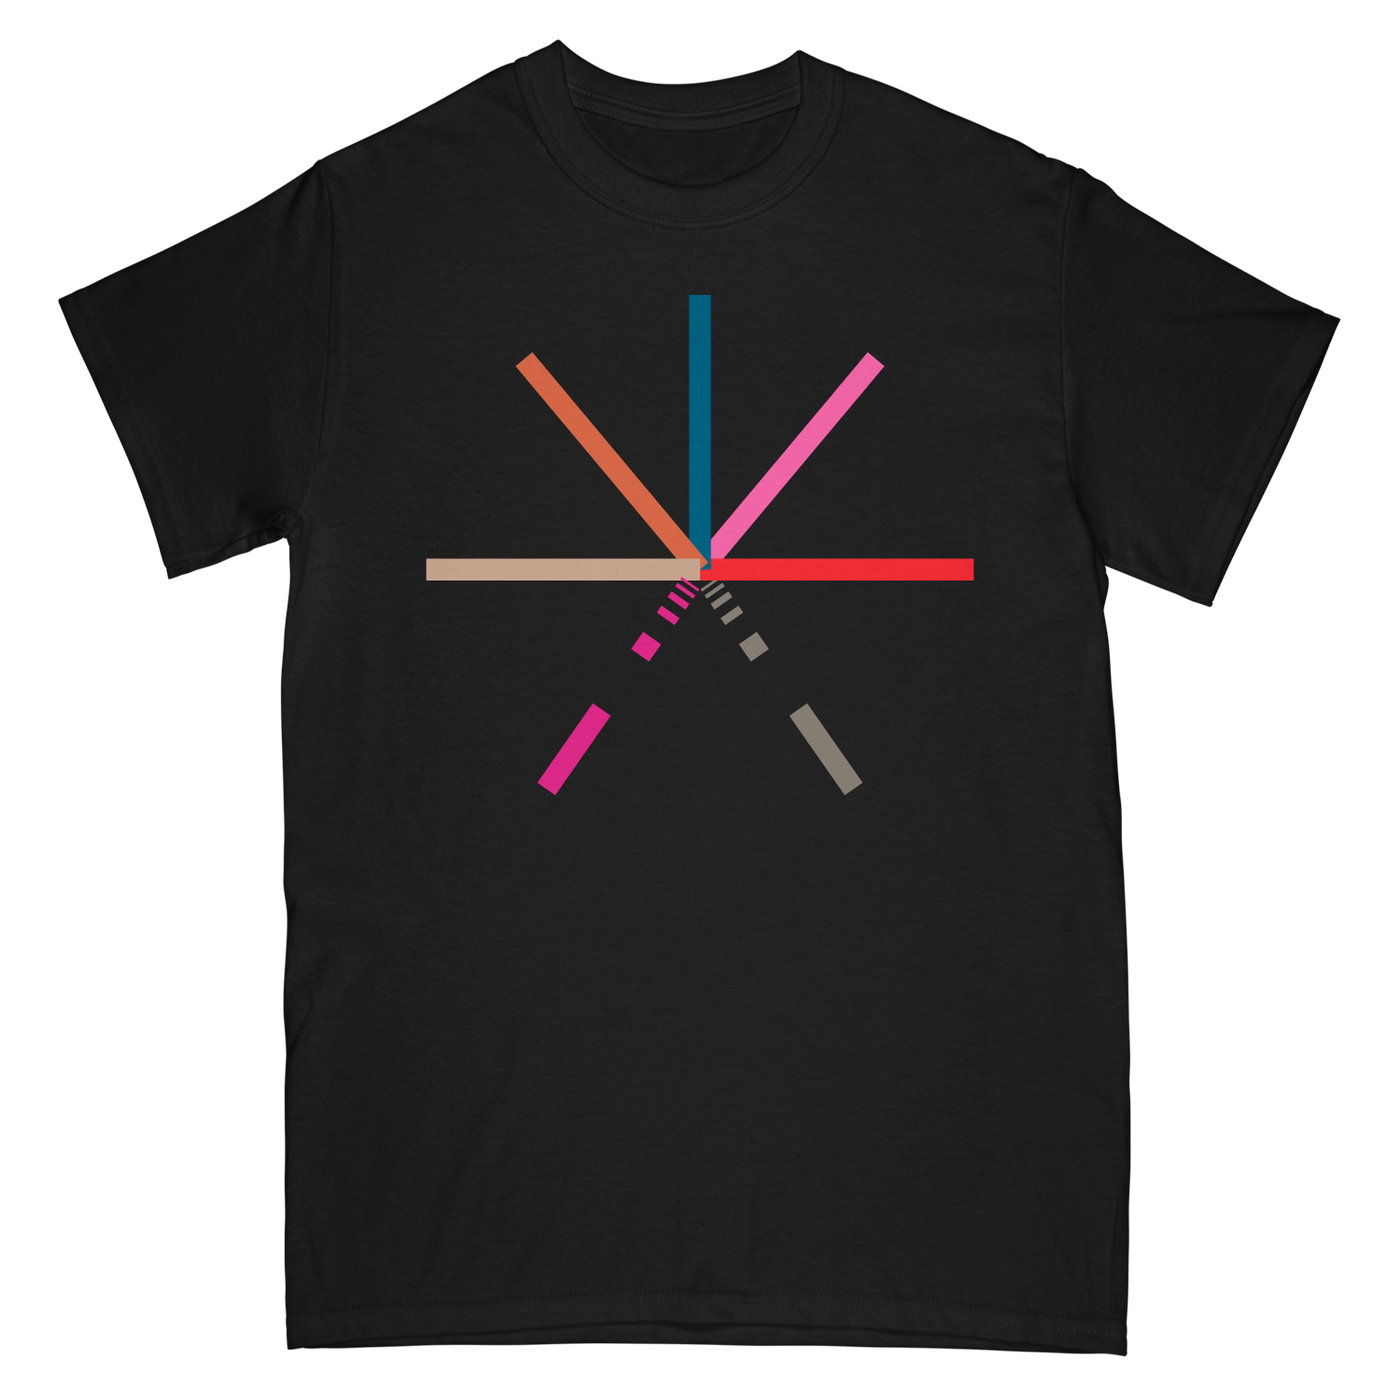 Touche-Amore-7-Color-Asterisk-Tee-Black